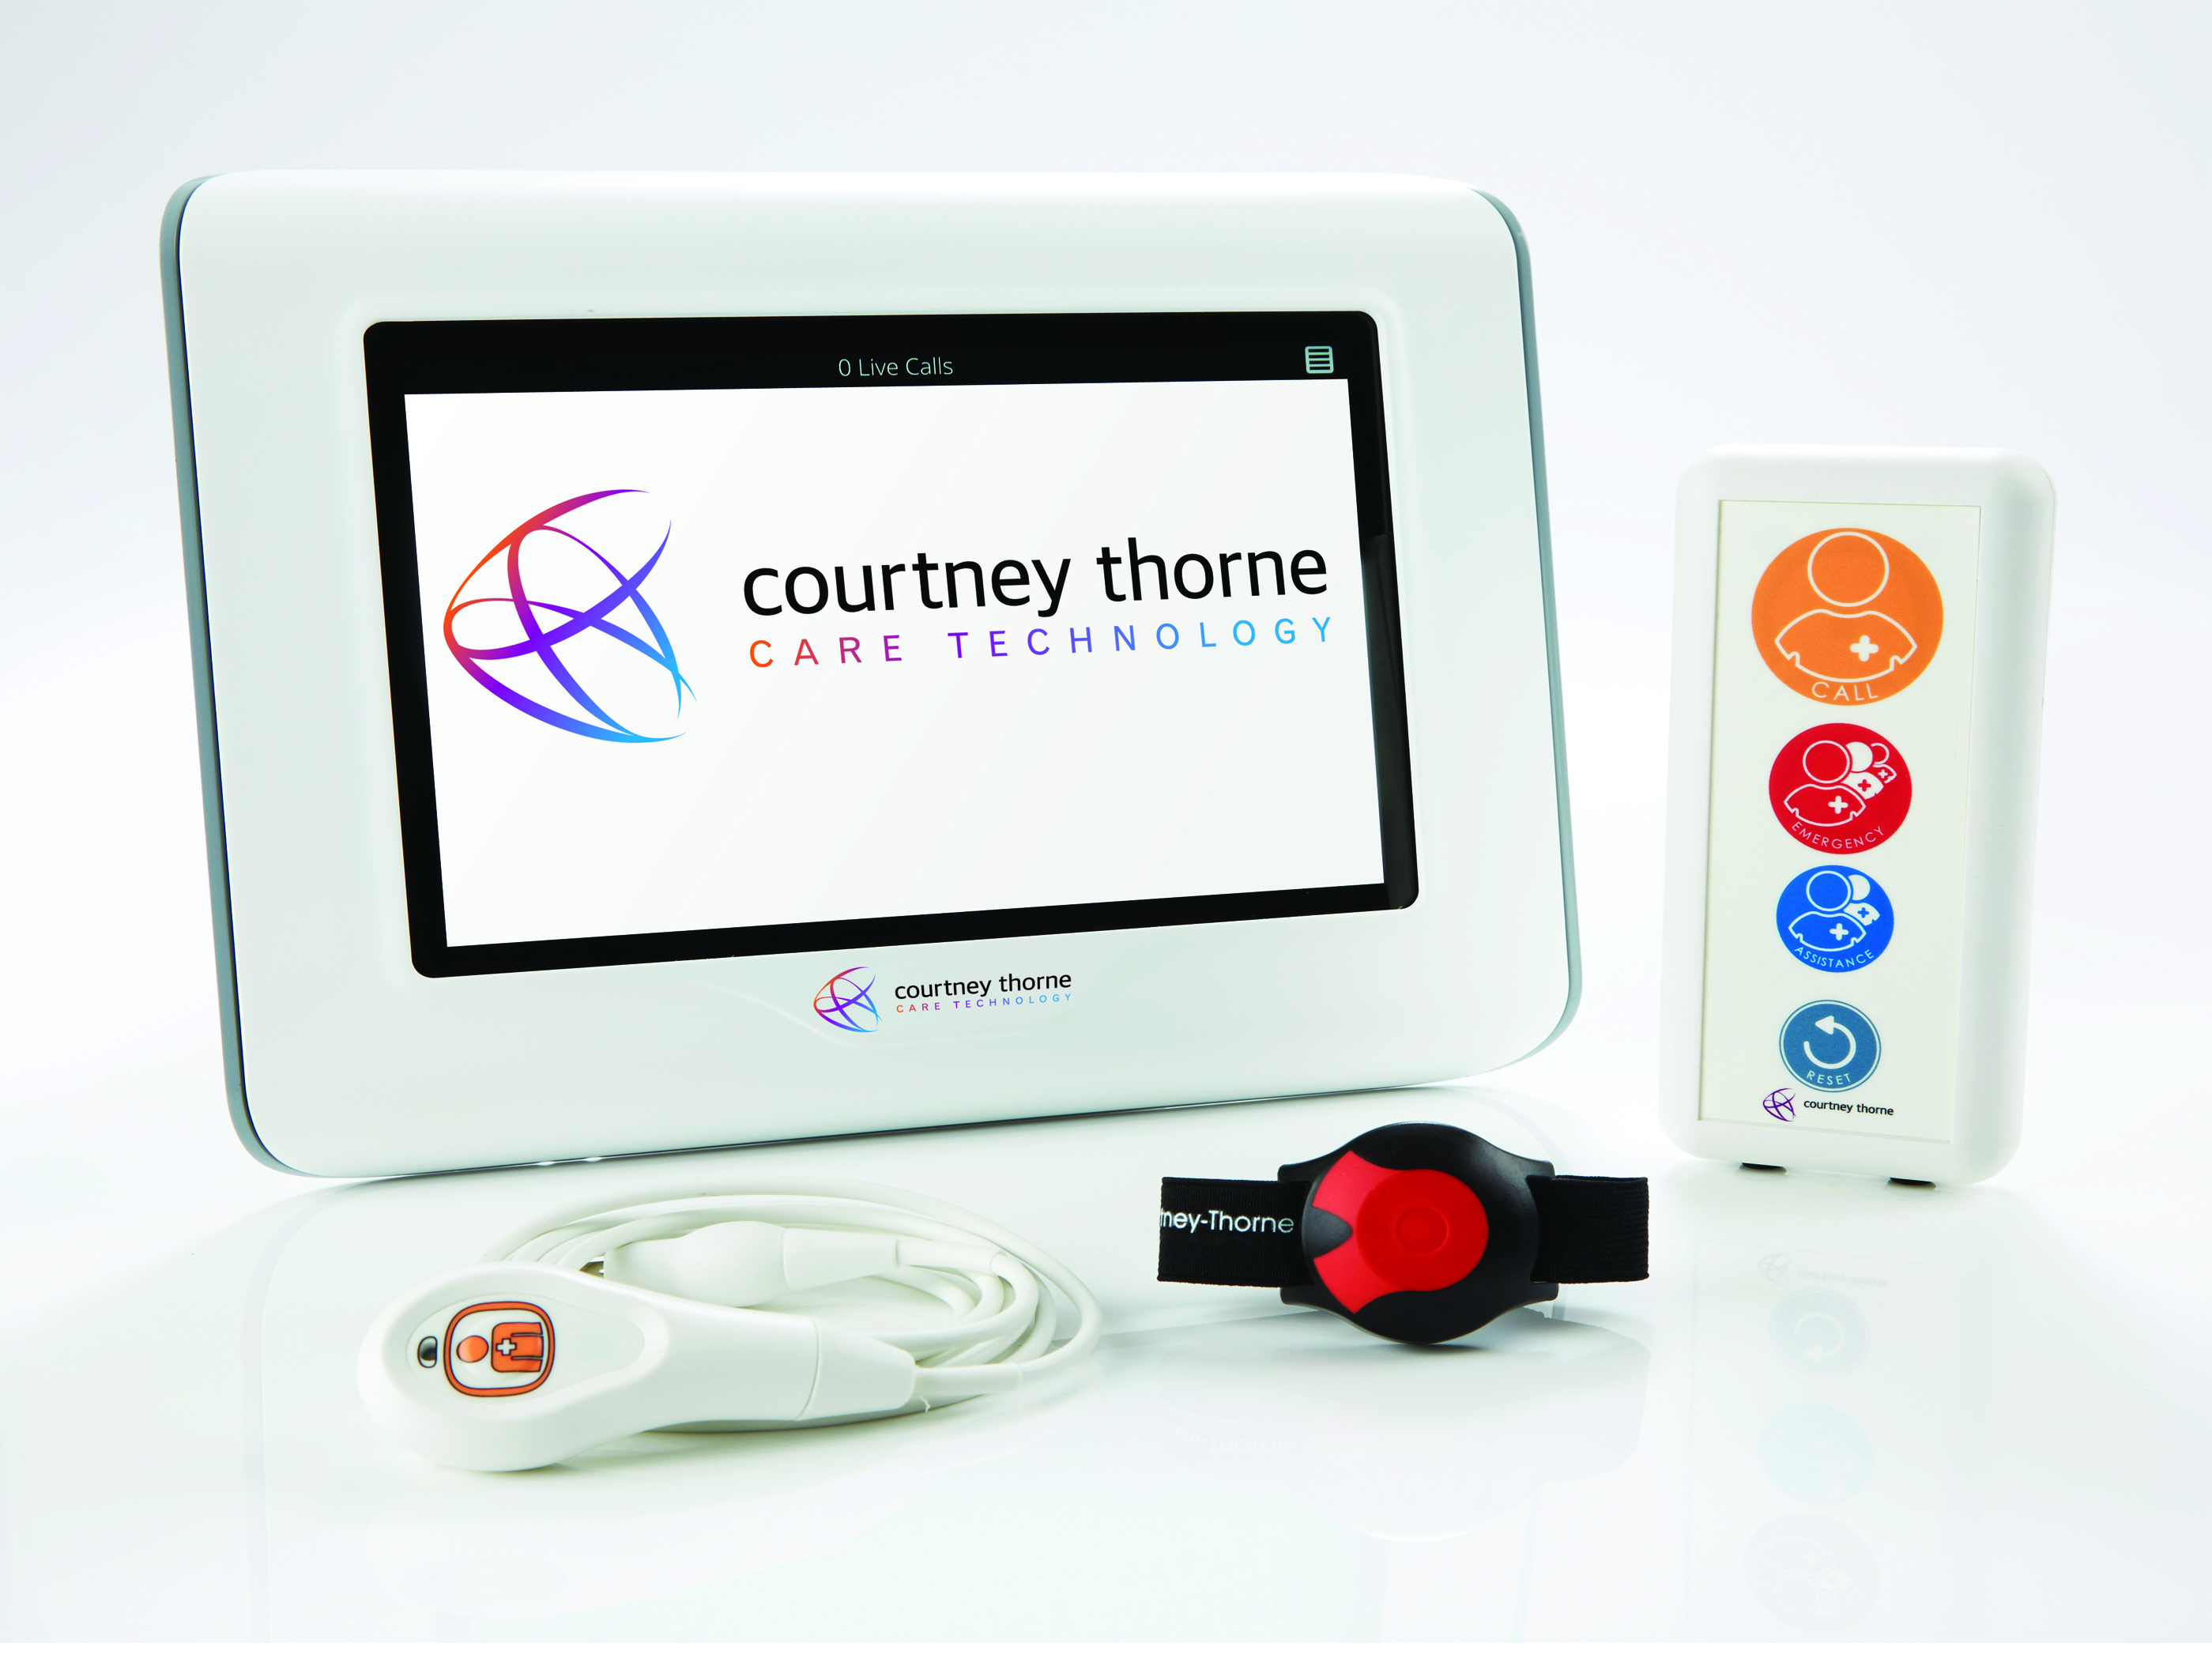 Courtney Thorne has launched the next-generation Altra Nurse Call system